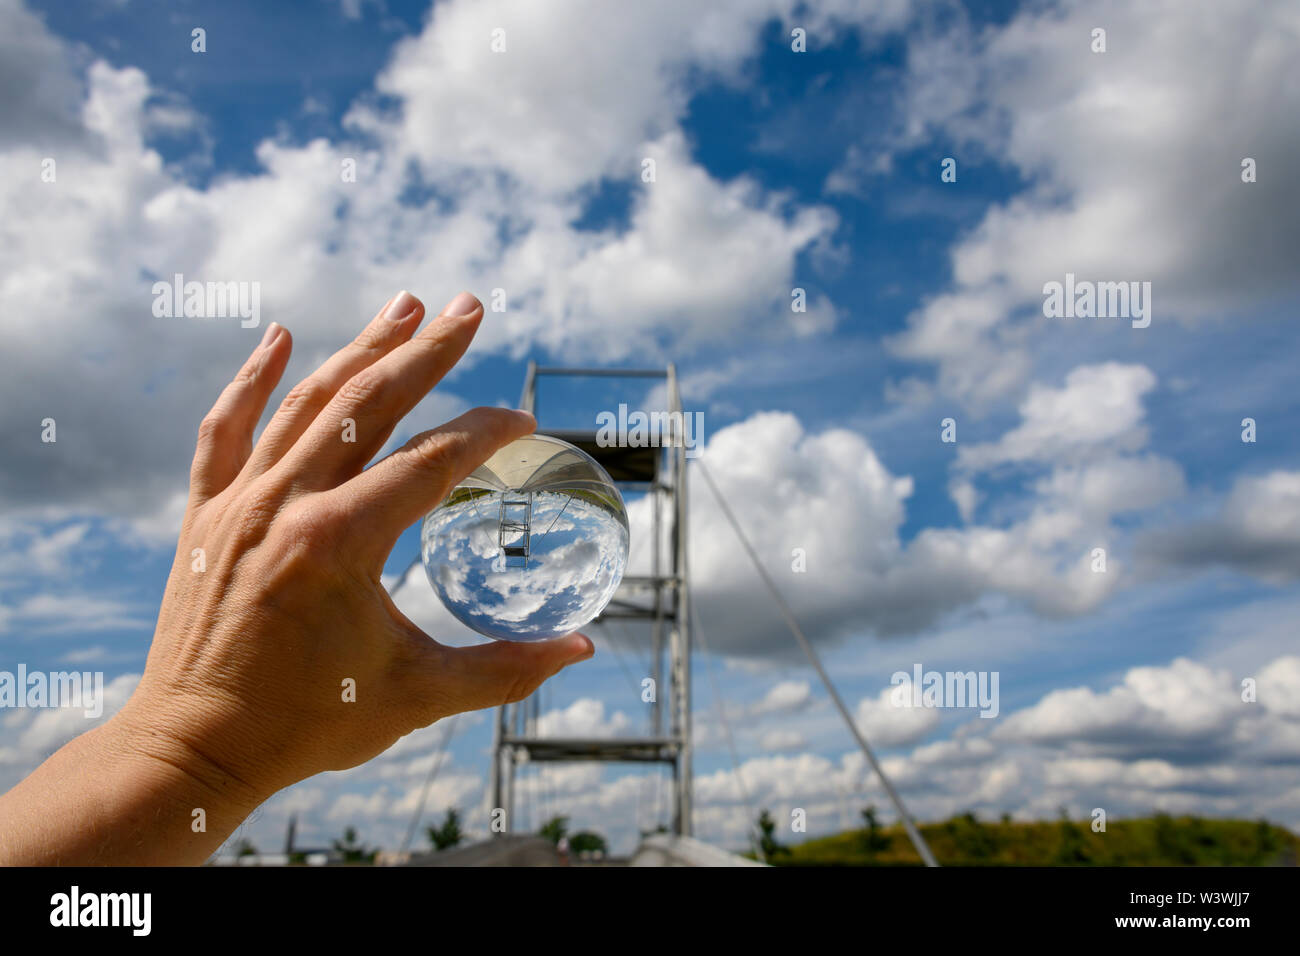 Hand holding lensball with sky and bridge Stock Photo